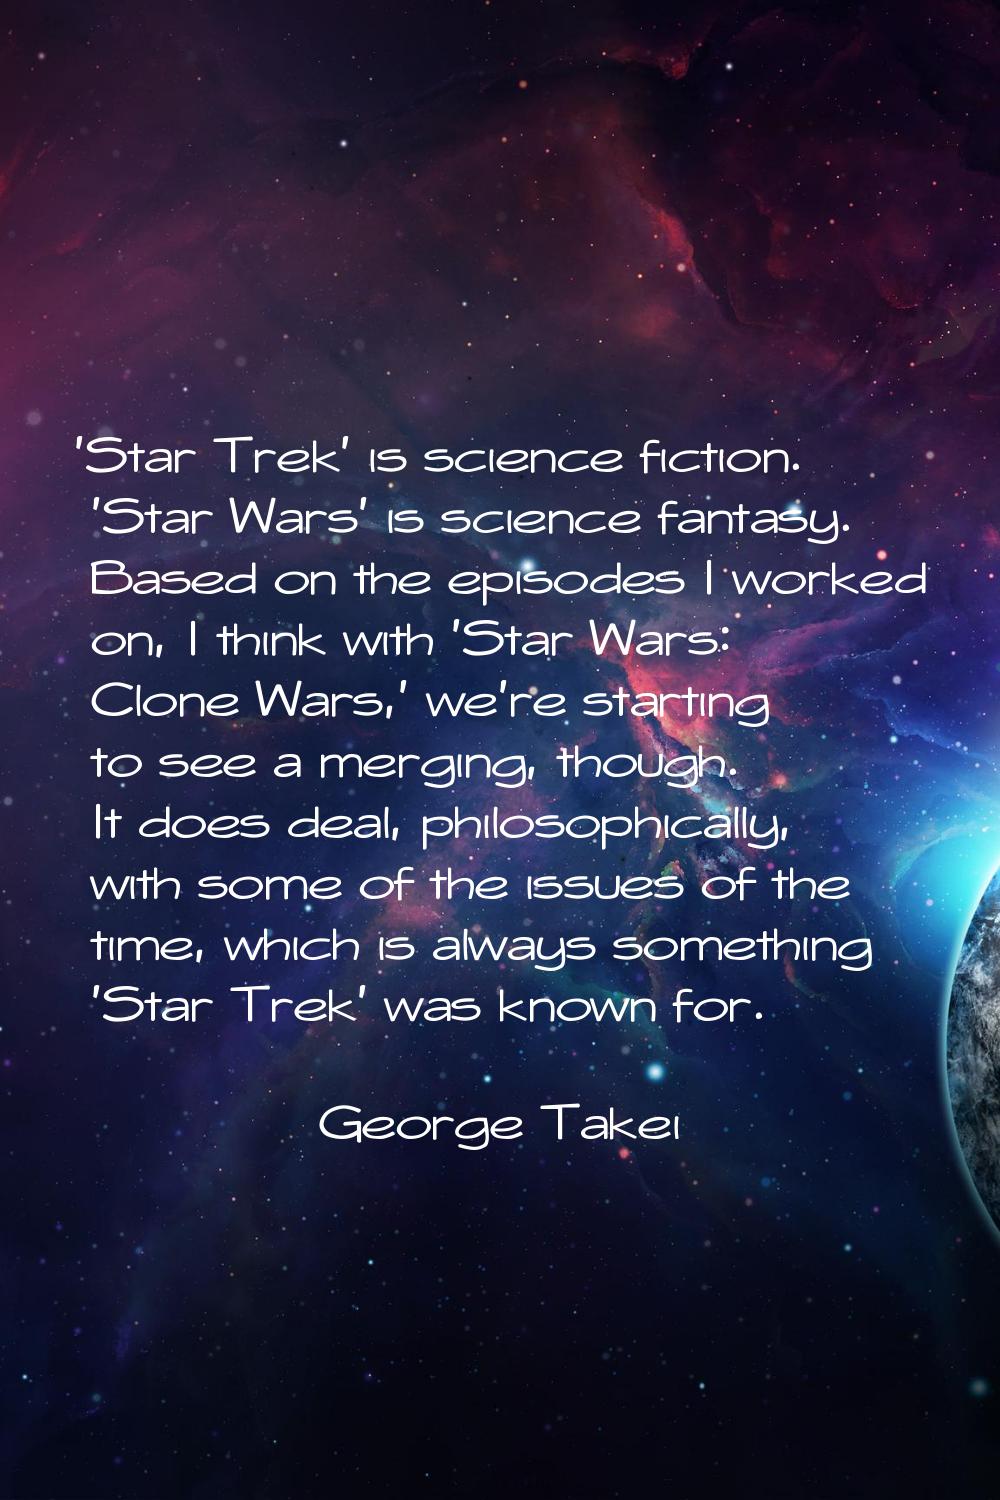 'Star Trek' is science fiction. 'Star Wars' is science fantasy. Based on the episodes I worked on, 